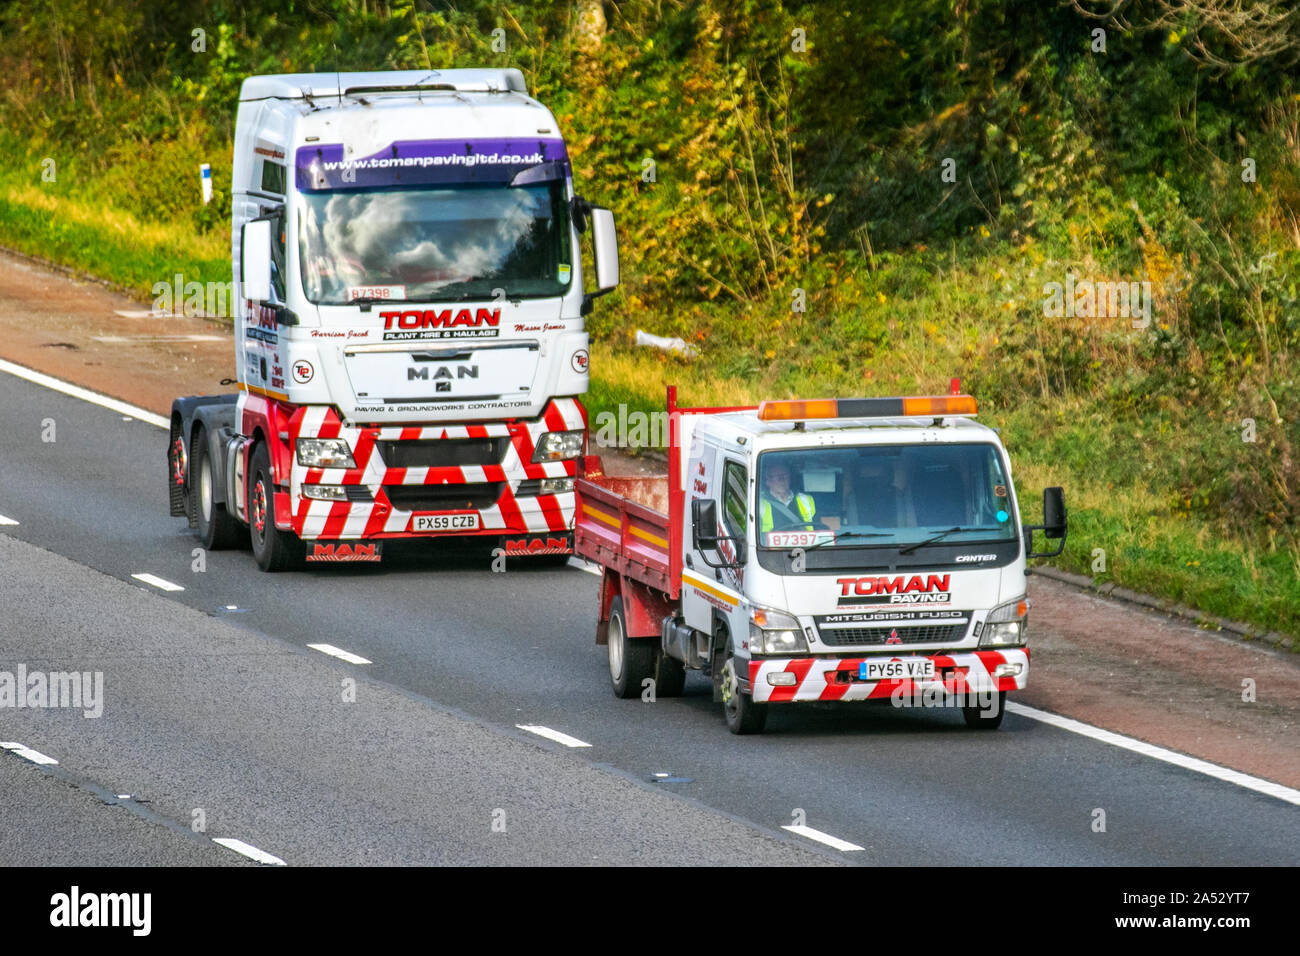 Toman Plant Hire & Haulage; Motorway heavy bulk Haulage delivery trucks, haulage, lorry, transportation, fleet tractor unit power train, truck, special cargo, Scania vehicle, delivery, transport, industry, freight on the M6 at Lancaster, Stock Photo